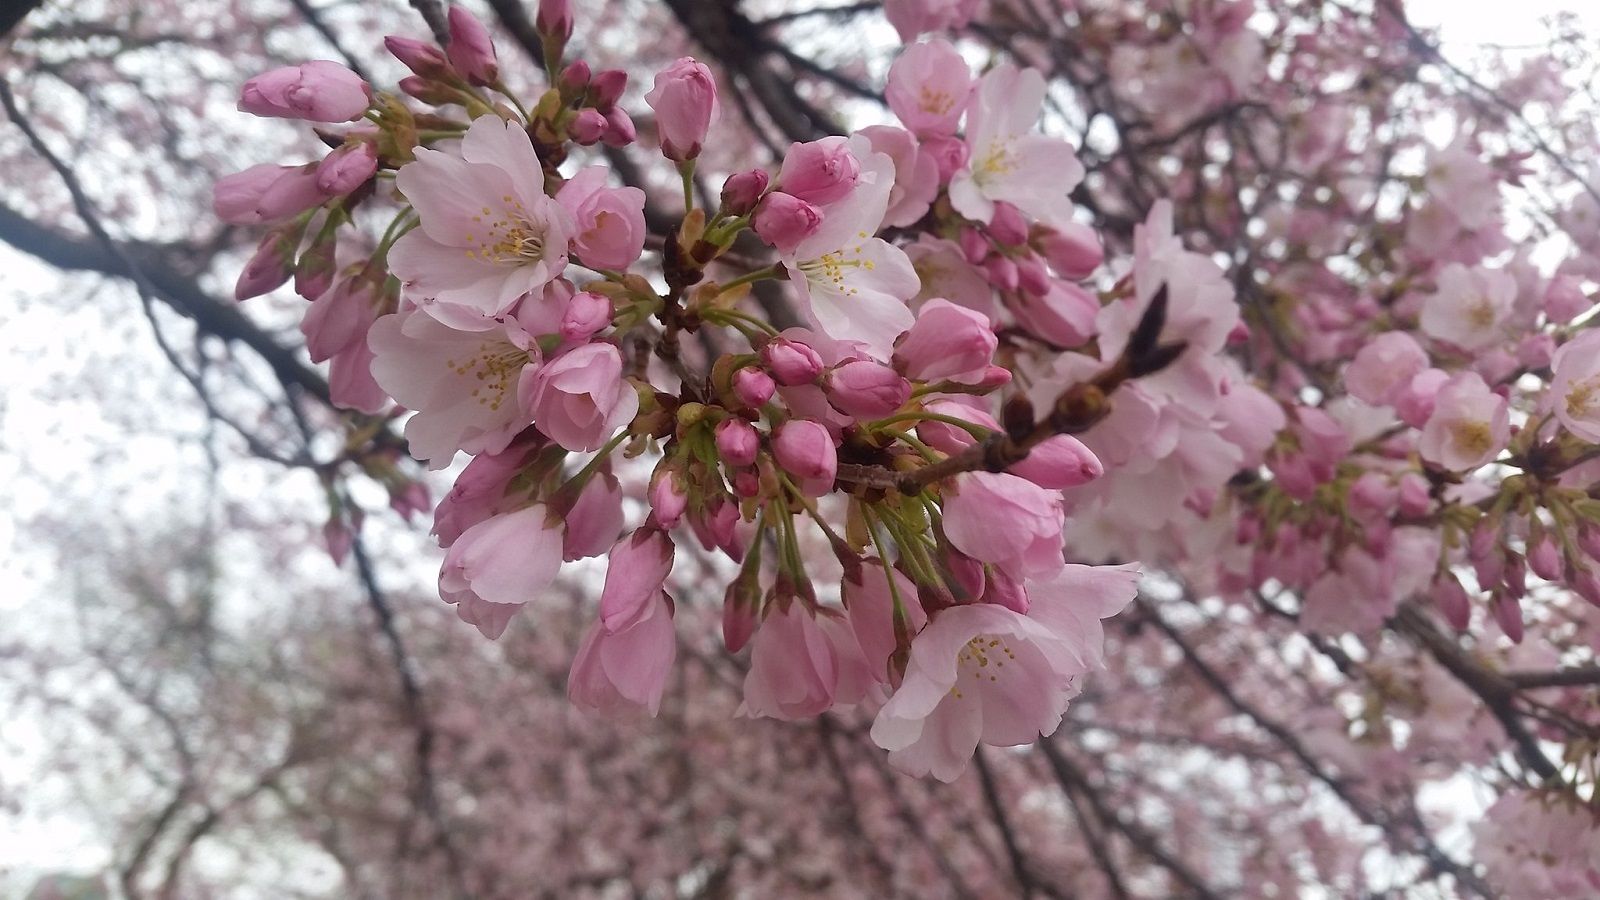 The possible snow on Monday should not affect the cherry blossoms's peak bloom, still set between April 8 to April 12. (WTOP/Kathy Stewart)